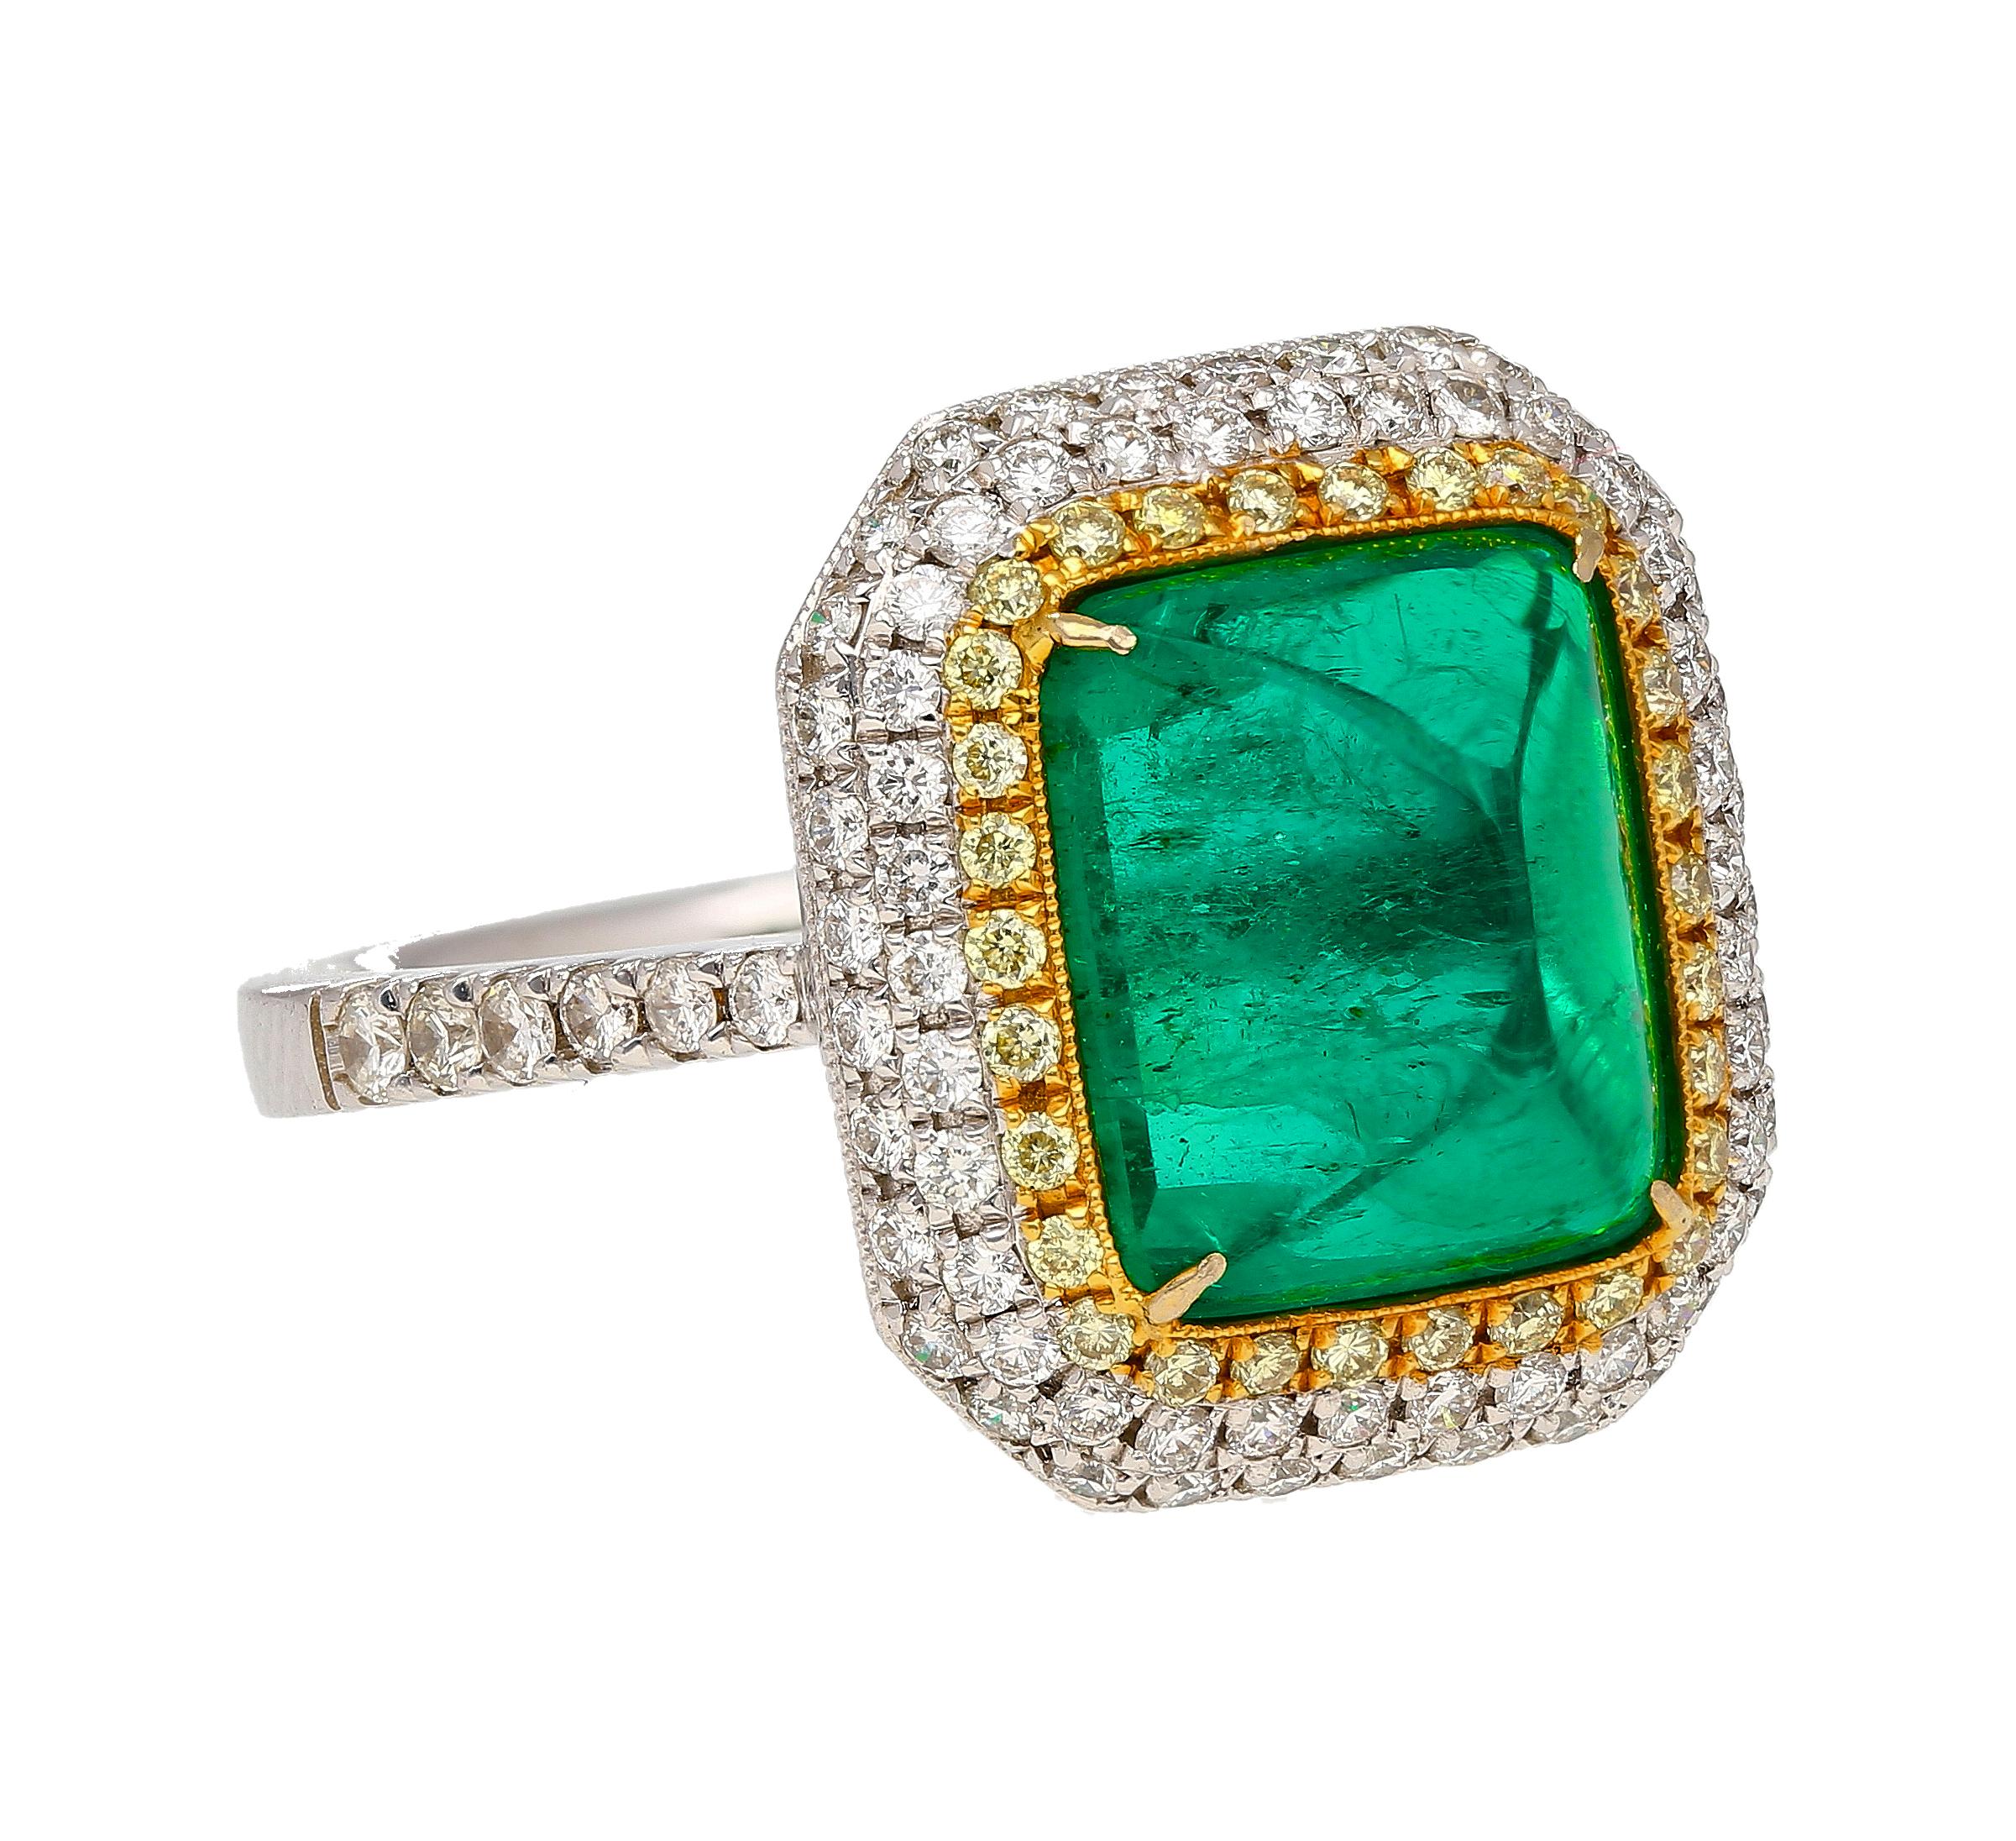 Unveil luxury and sophistication with our remarkable 4.49 carat sugarloaf cabochon cut emerald ring. Crafted with precision and adorned with a striking yellow and white diamond halo. 

Set in lavish 18K solid gold, with a two-tone overlay that